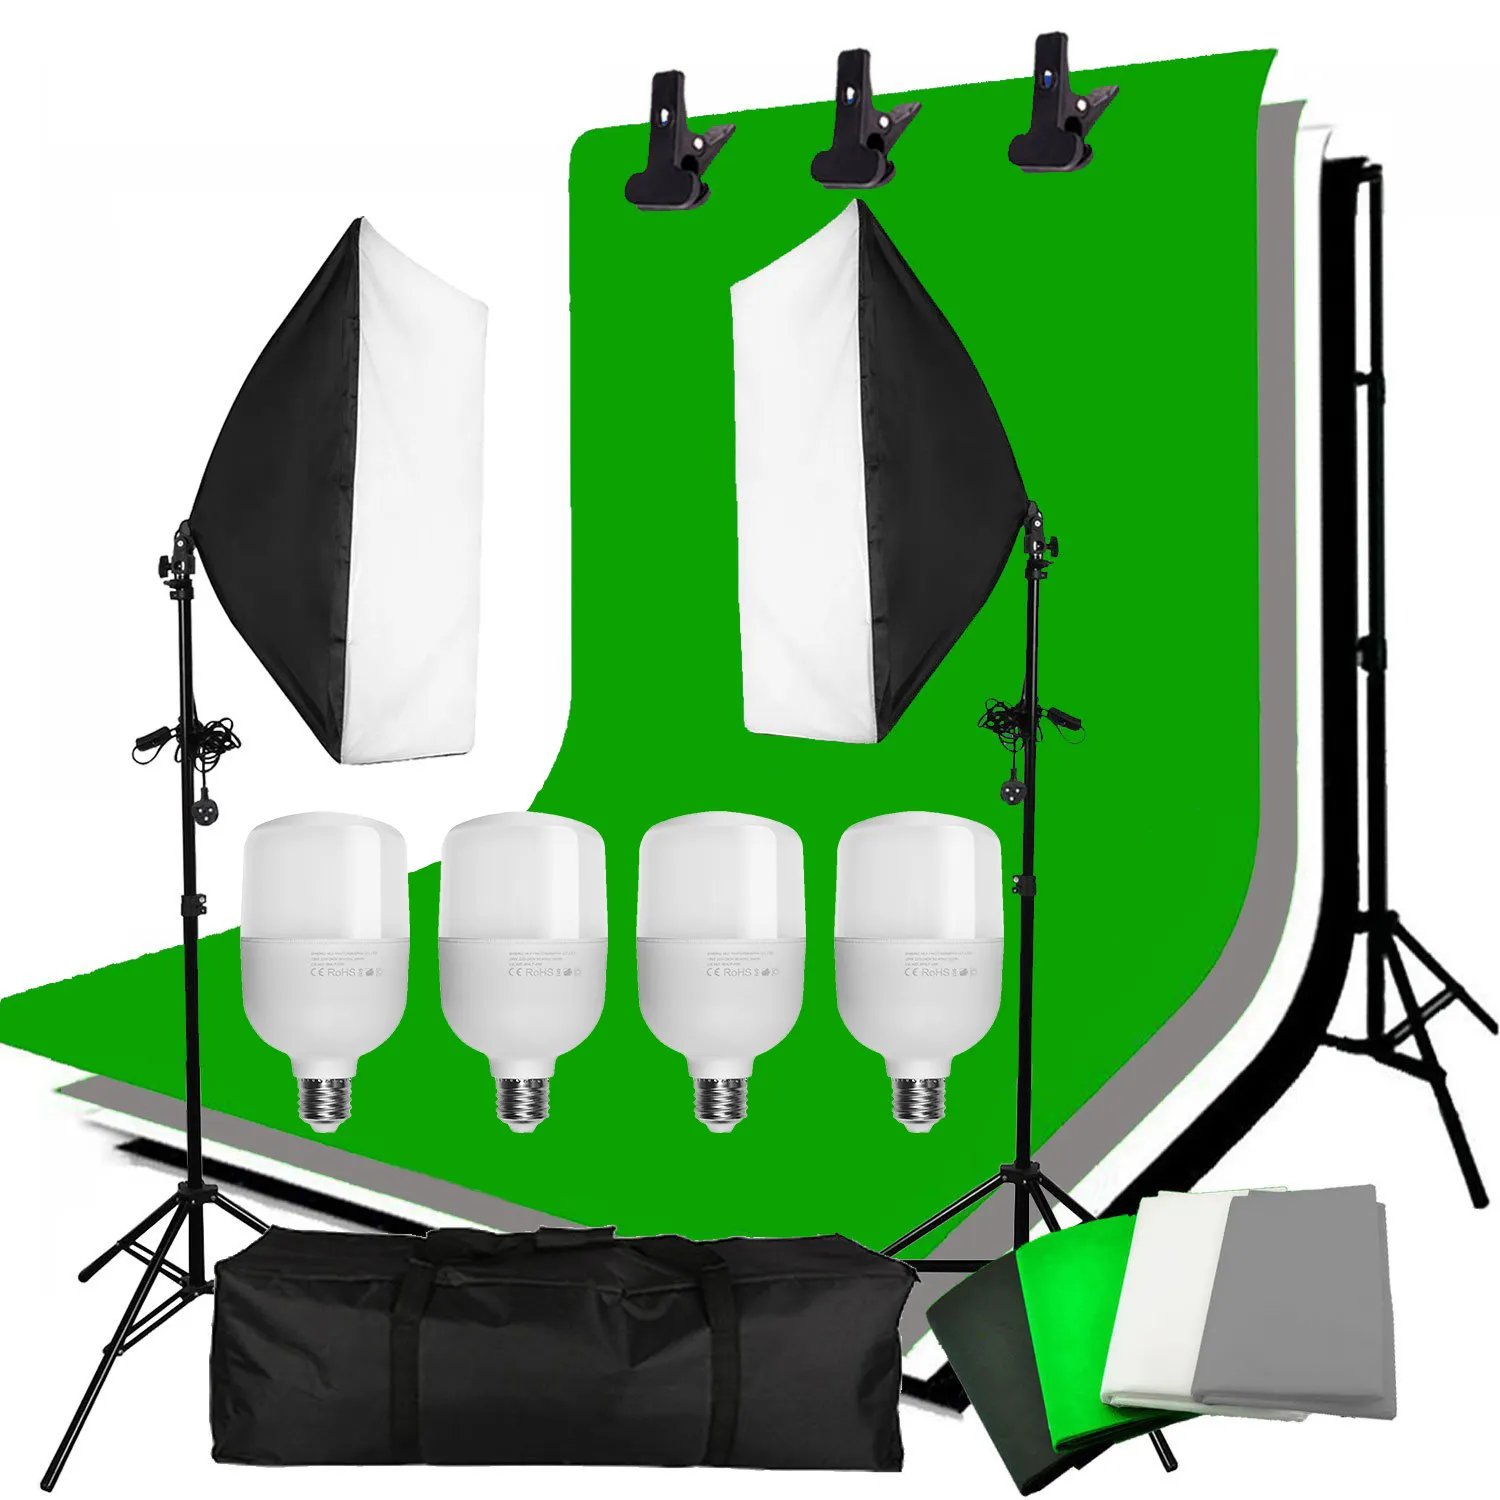 4PCS 25W LED Photo Studio Softbox Soft Box Lighting 4 Backdrop + 2x2m Background Support Stand Kit for Video Shooting